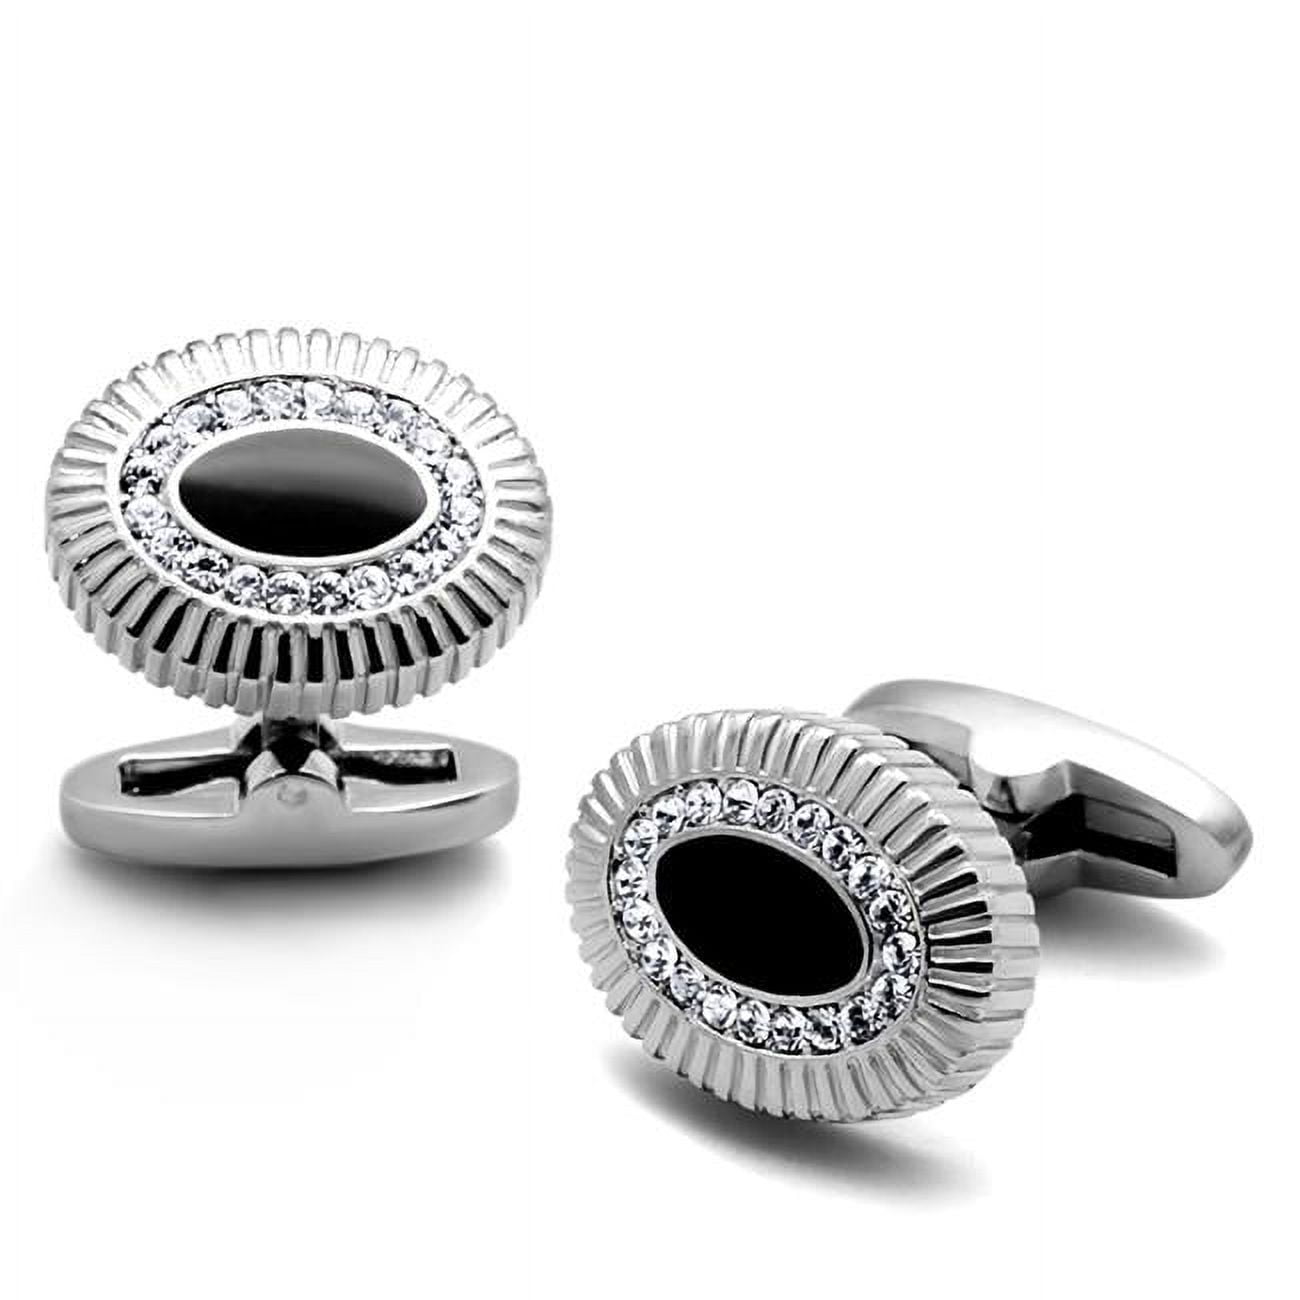 Picture of Alamode TK1656 Men High Polished Stainless Steel Cufflink with Top Grade Crystal in Clear